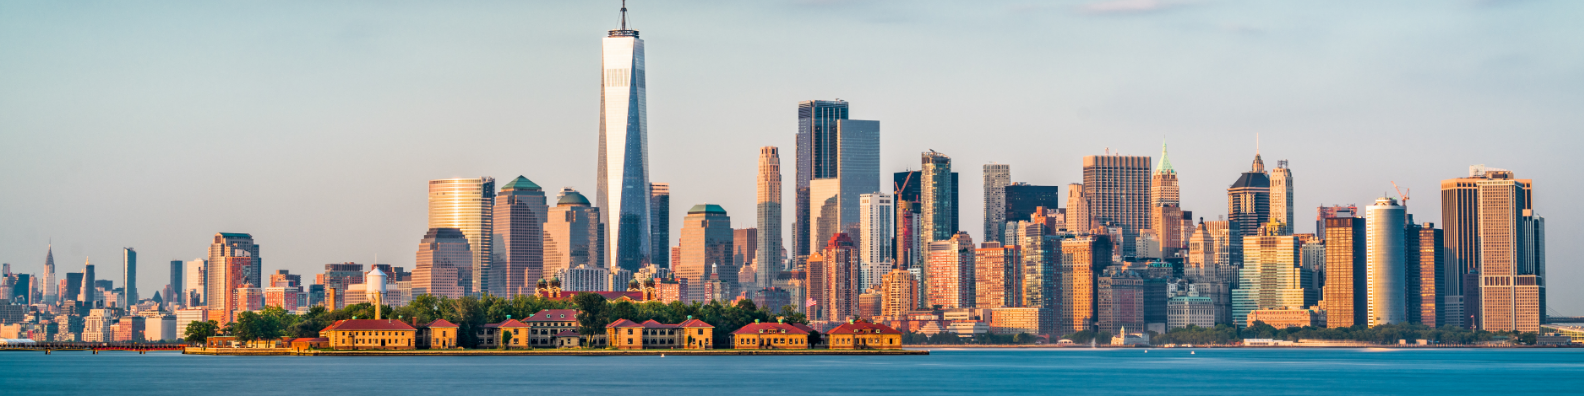 New York Employment Law Update | April 16